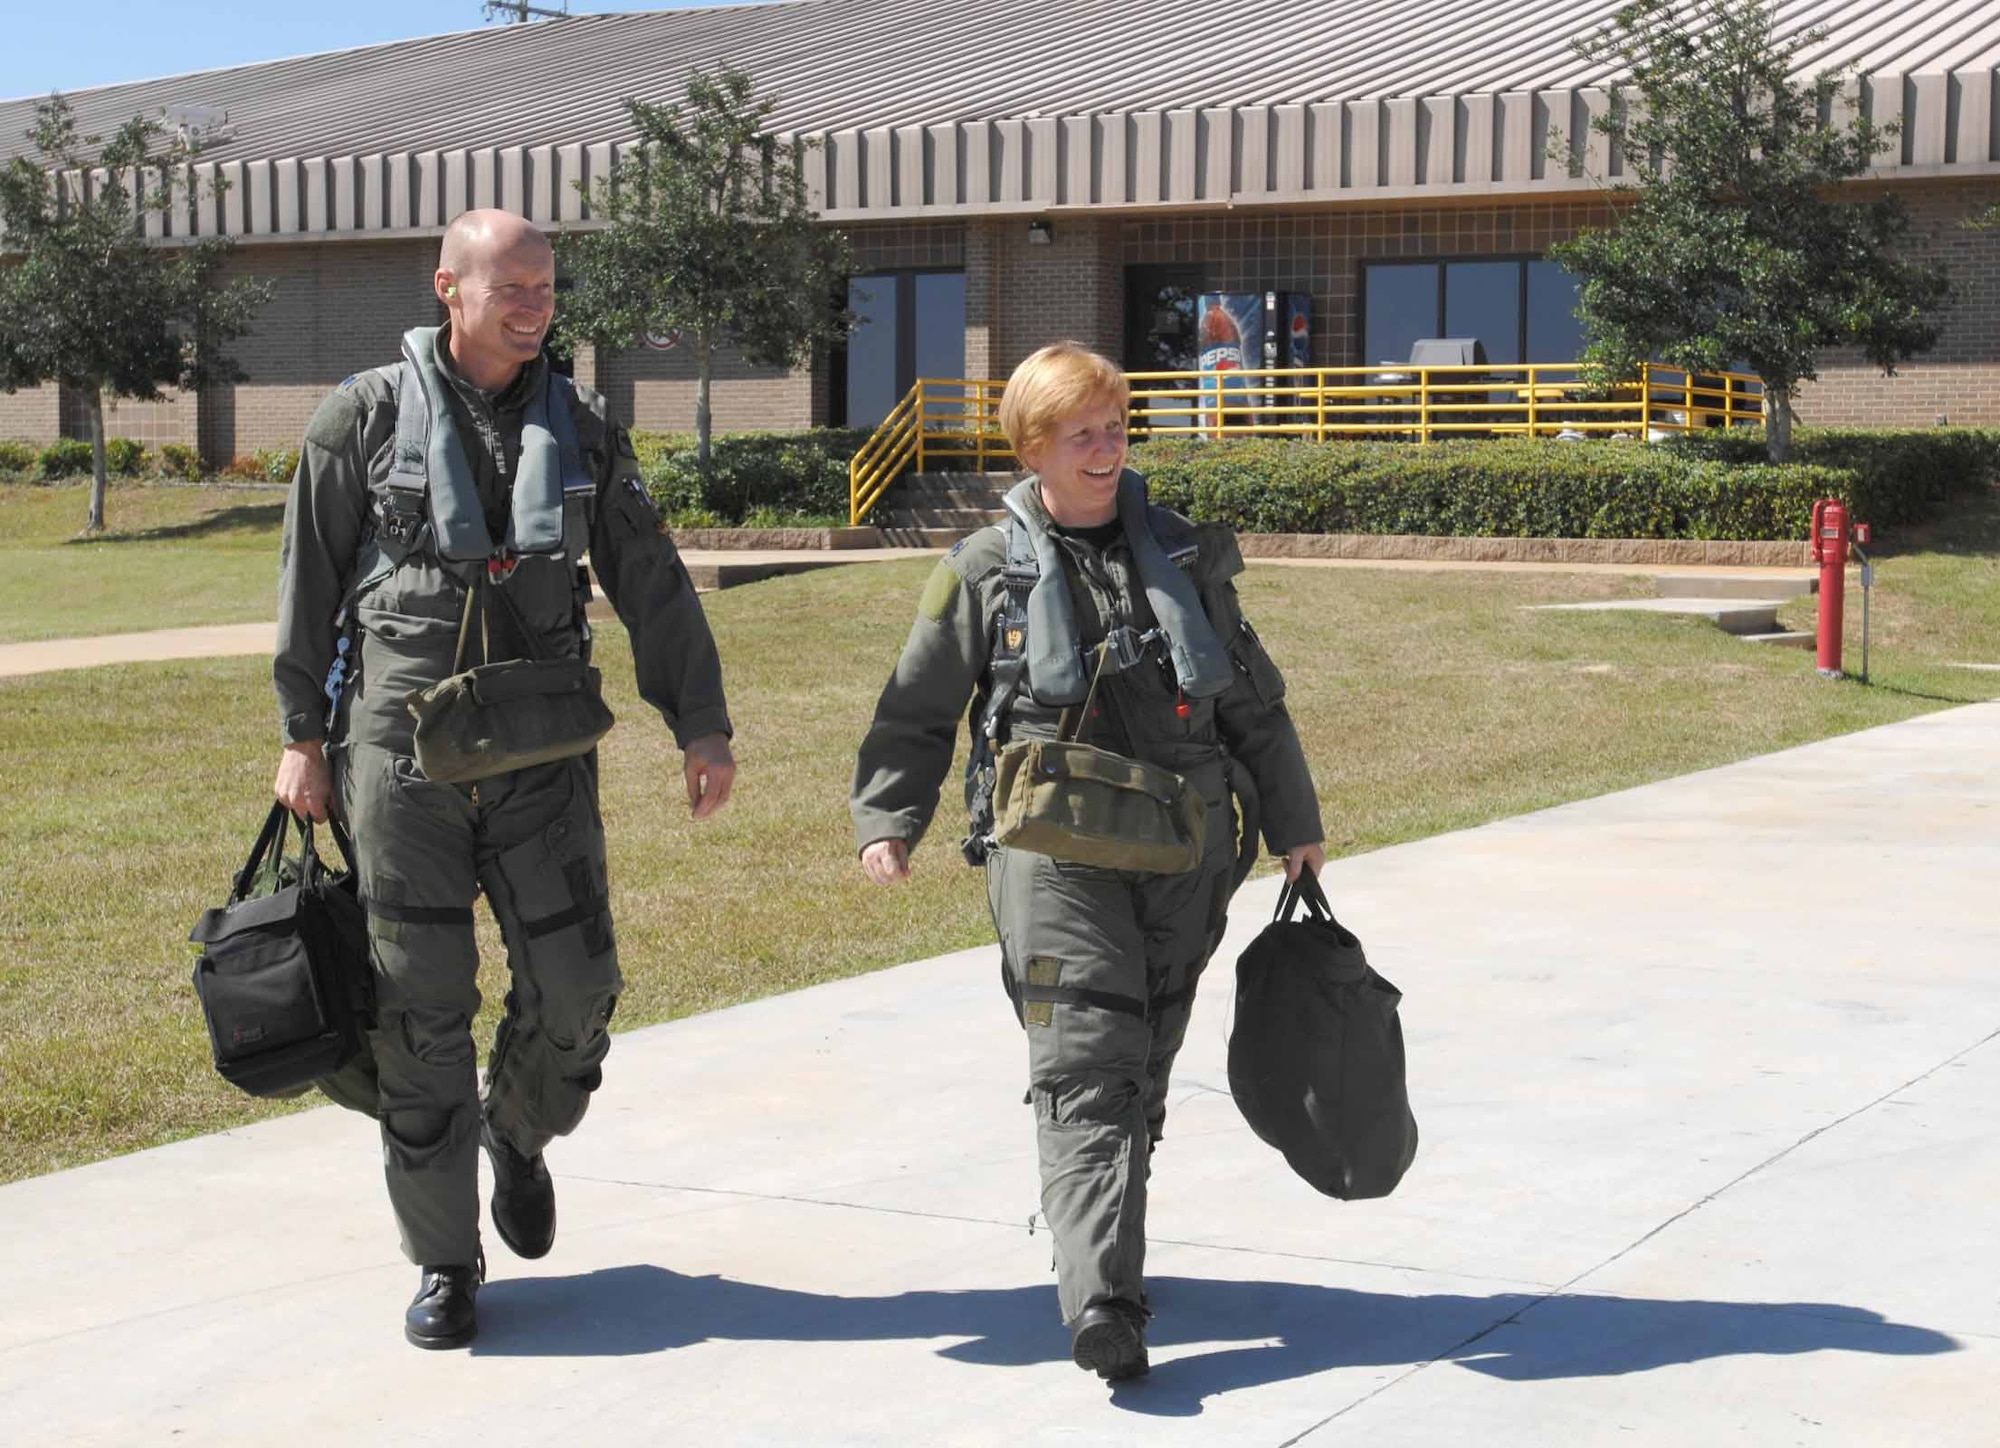 Lt. Col. Sharon Preszler, 20th Fighter Wing staff director and Commander's Action Group director, and Lt. Col. Scott Manning, 79th Fighter Squadron commander, walk out to their jets Thursday for Col. Prezsler's fini flight. (U.S. Air Force photo/Staff Sgt. Josef Cole III)